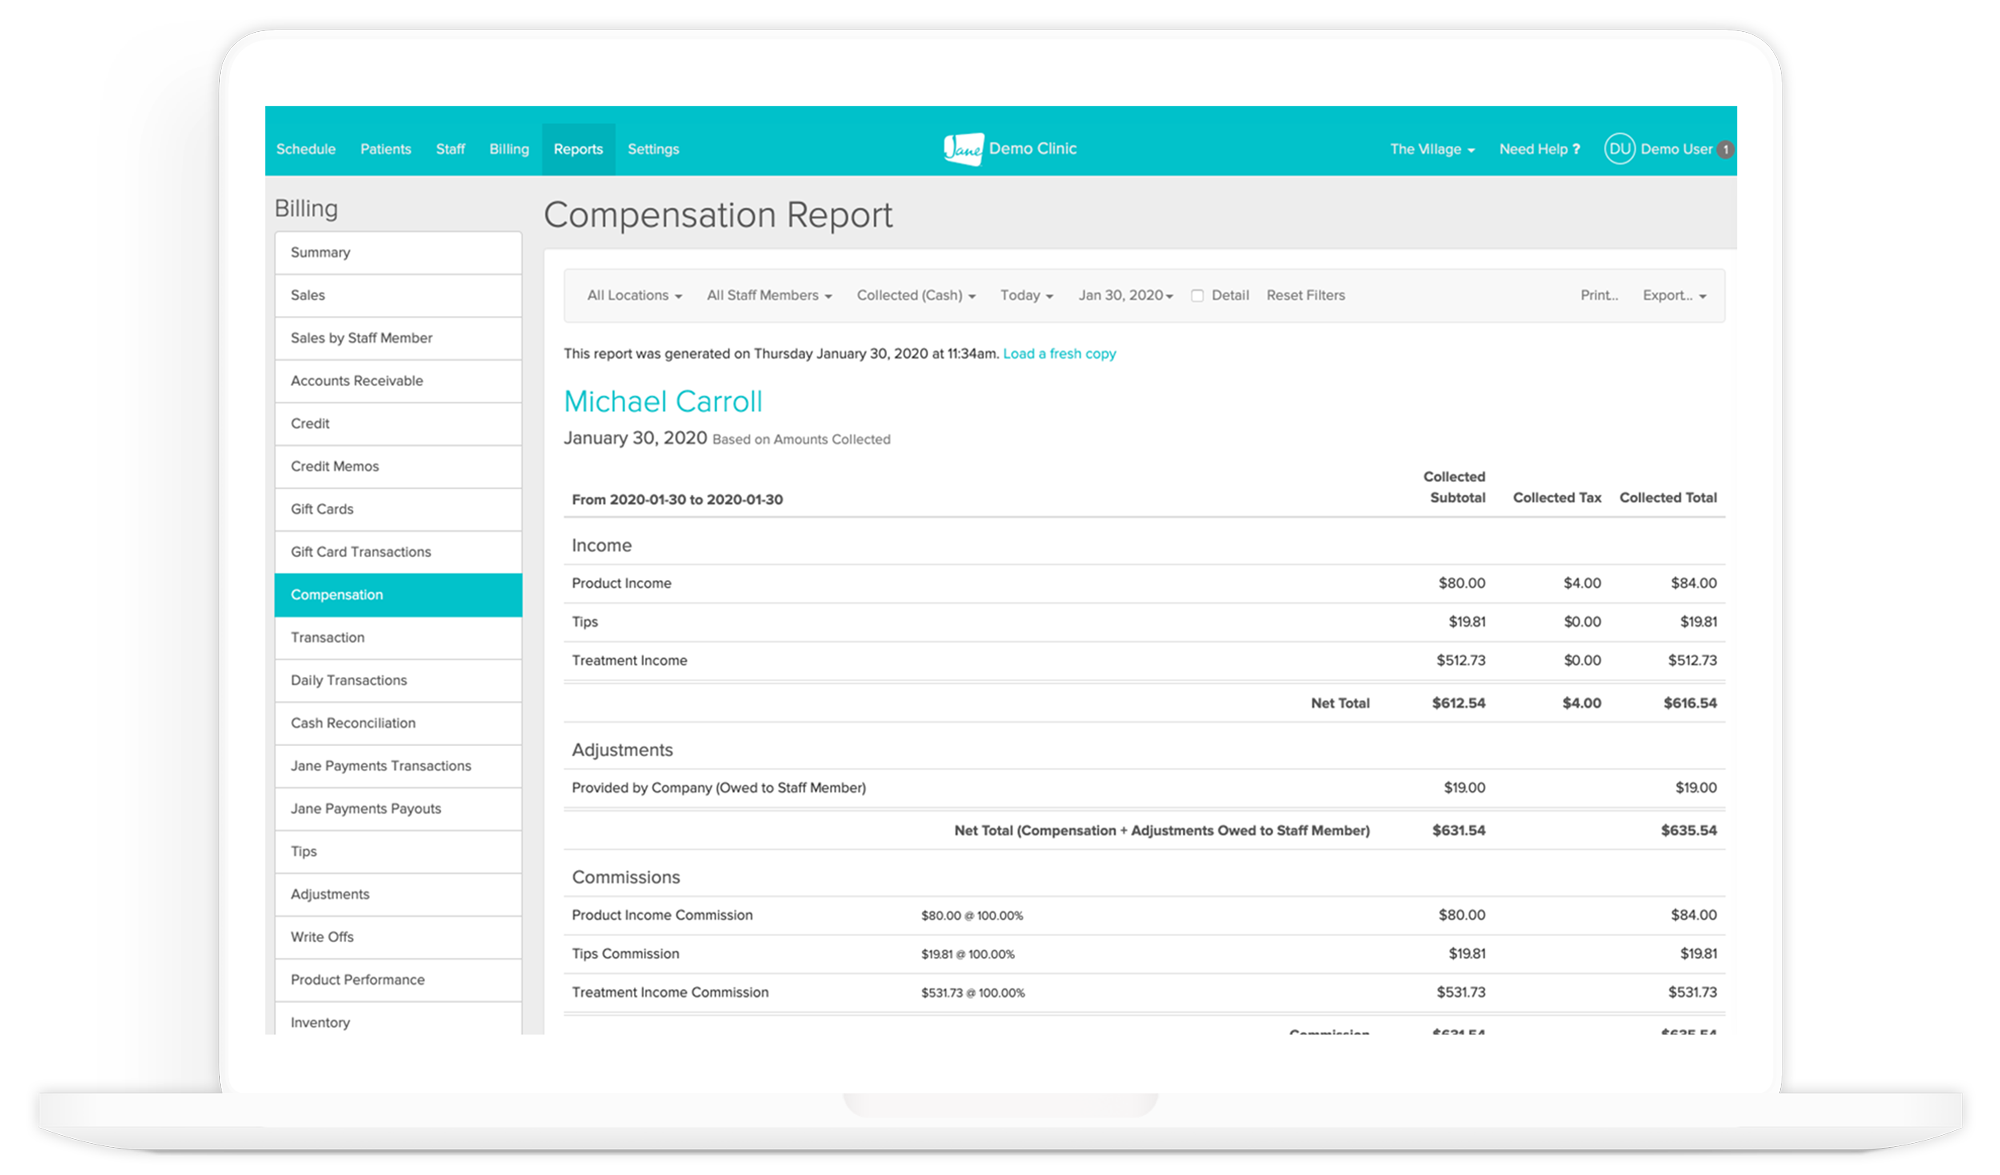 Get a full financial report of your health care clinic, including your invoices, billing, inventory, and commissions.